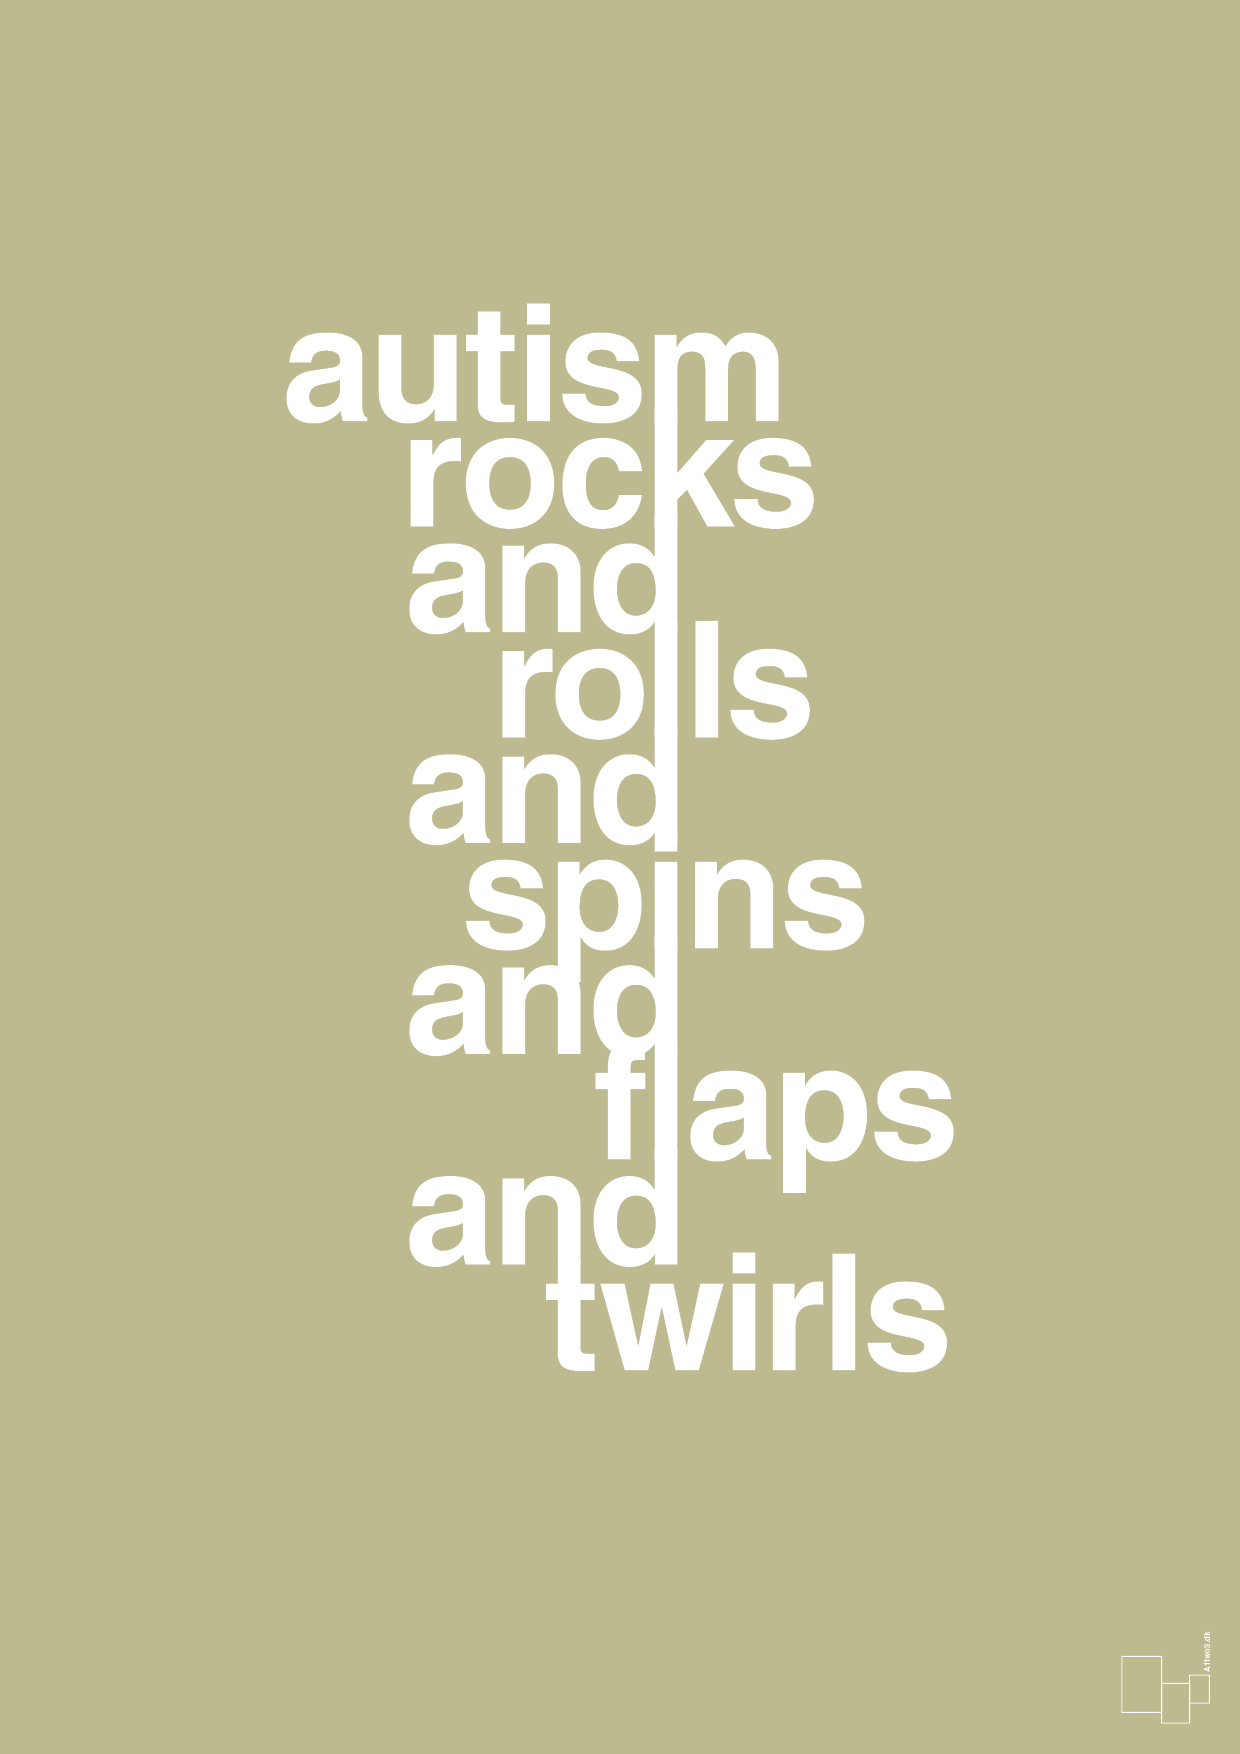 autism rocks and rolls and spins and flaps and twirls - Plakat med Samfund i Back to Nature